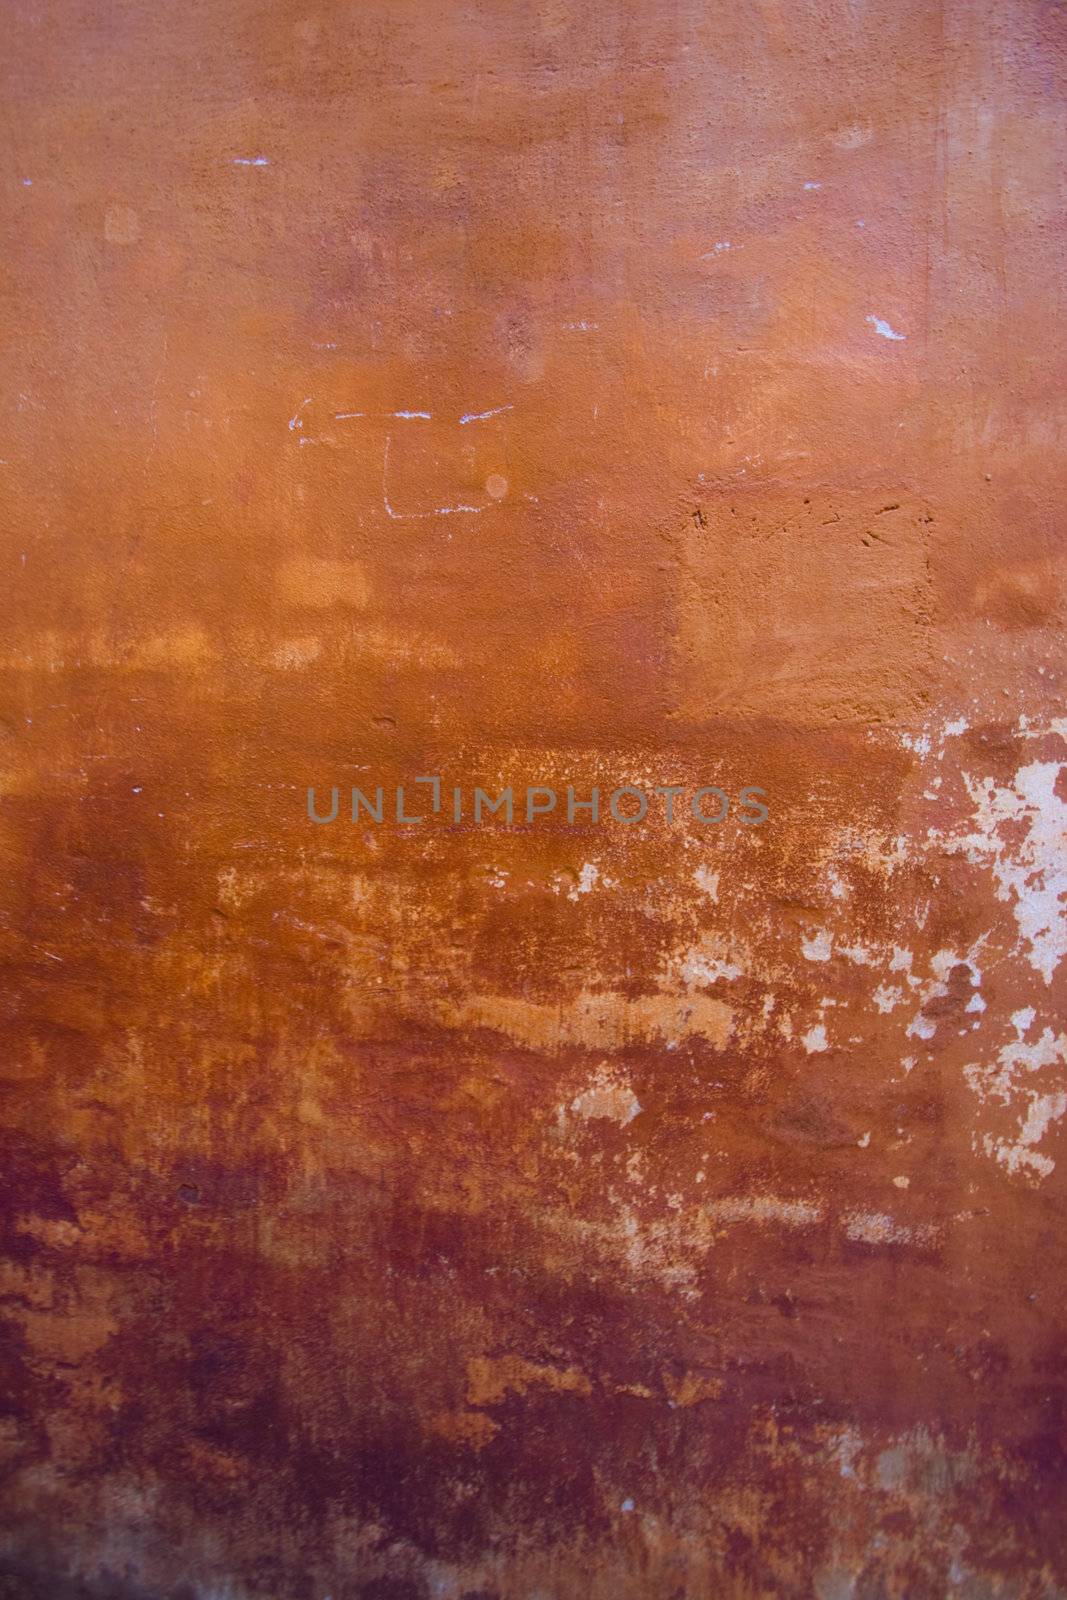 Grunge wall background with orange and brown colors